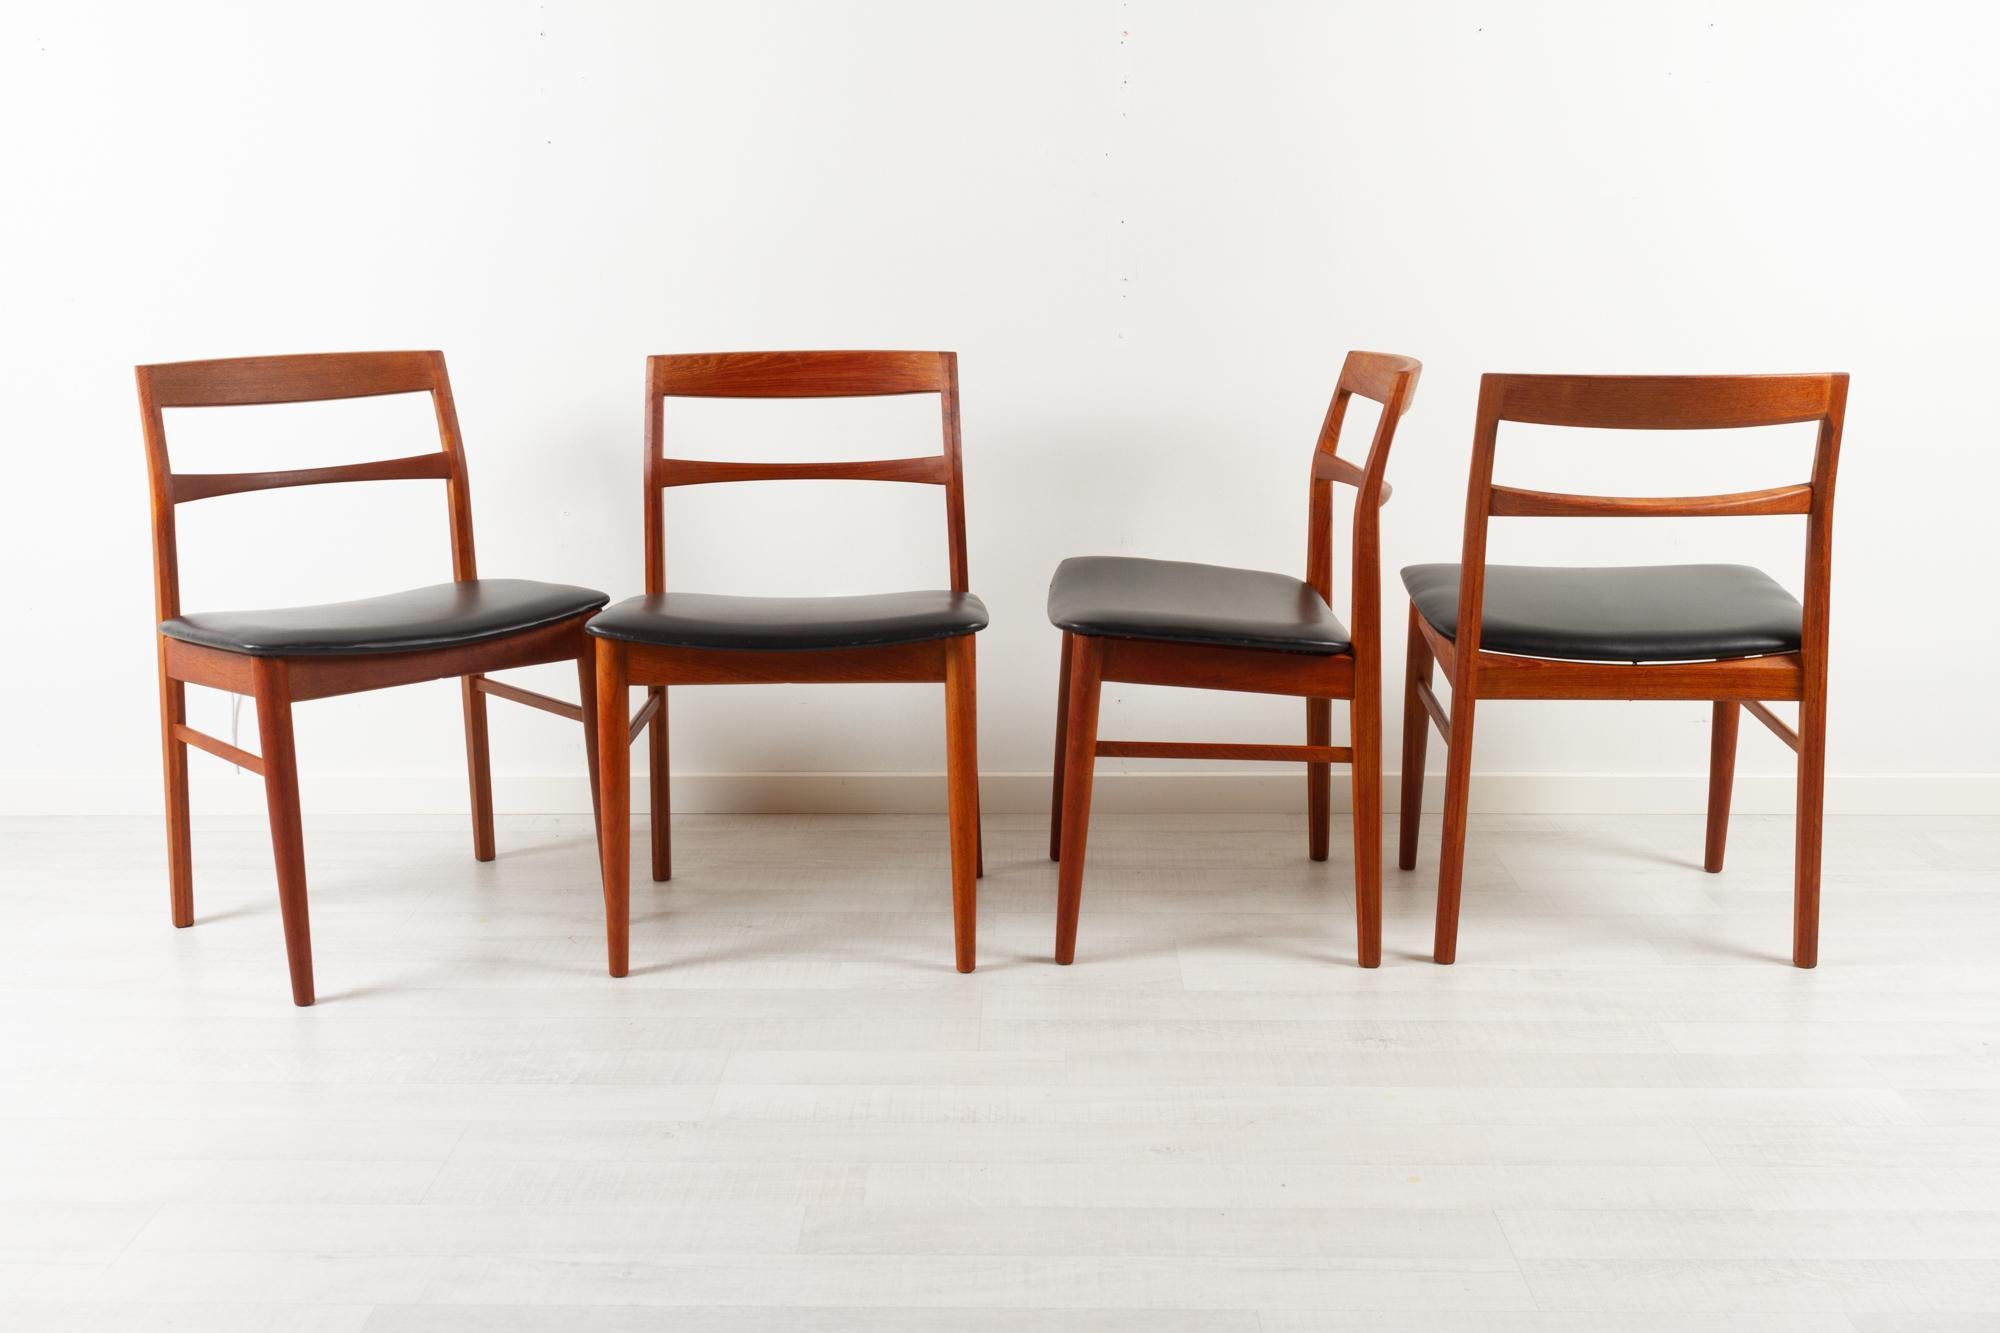 Vintage danish teak dining chairs by Kjærnulf for Vejle Møbelfabrik 1960s
Set of four dining chairs in teak designed by Danish architect Henning/Henry Kjærnulf and manufactured by Vejle Stole- og Møbelfabrik, Denmark.
Beautiful set of Danish